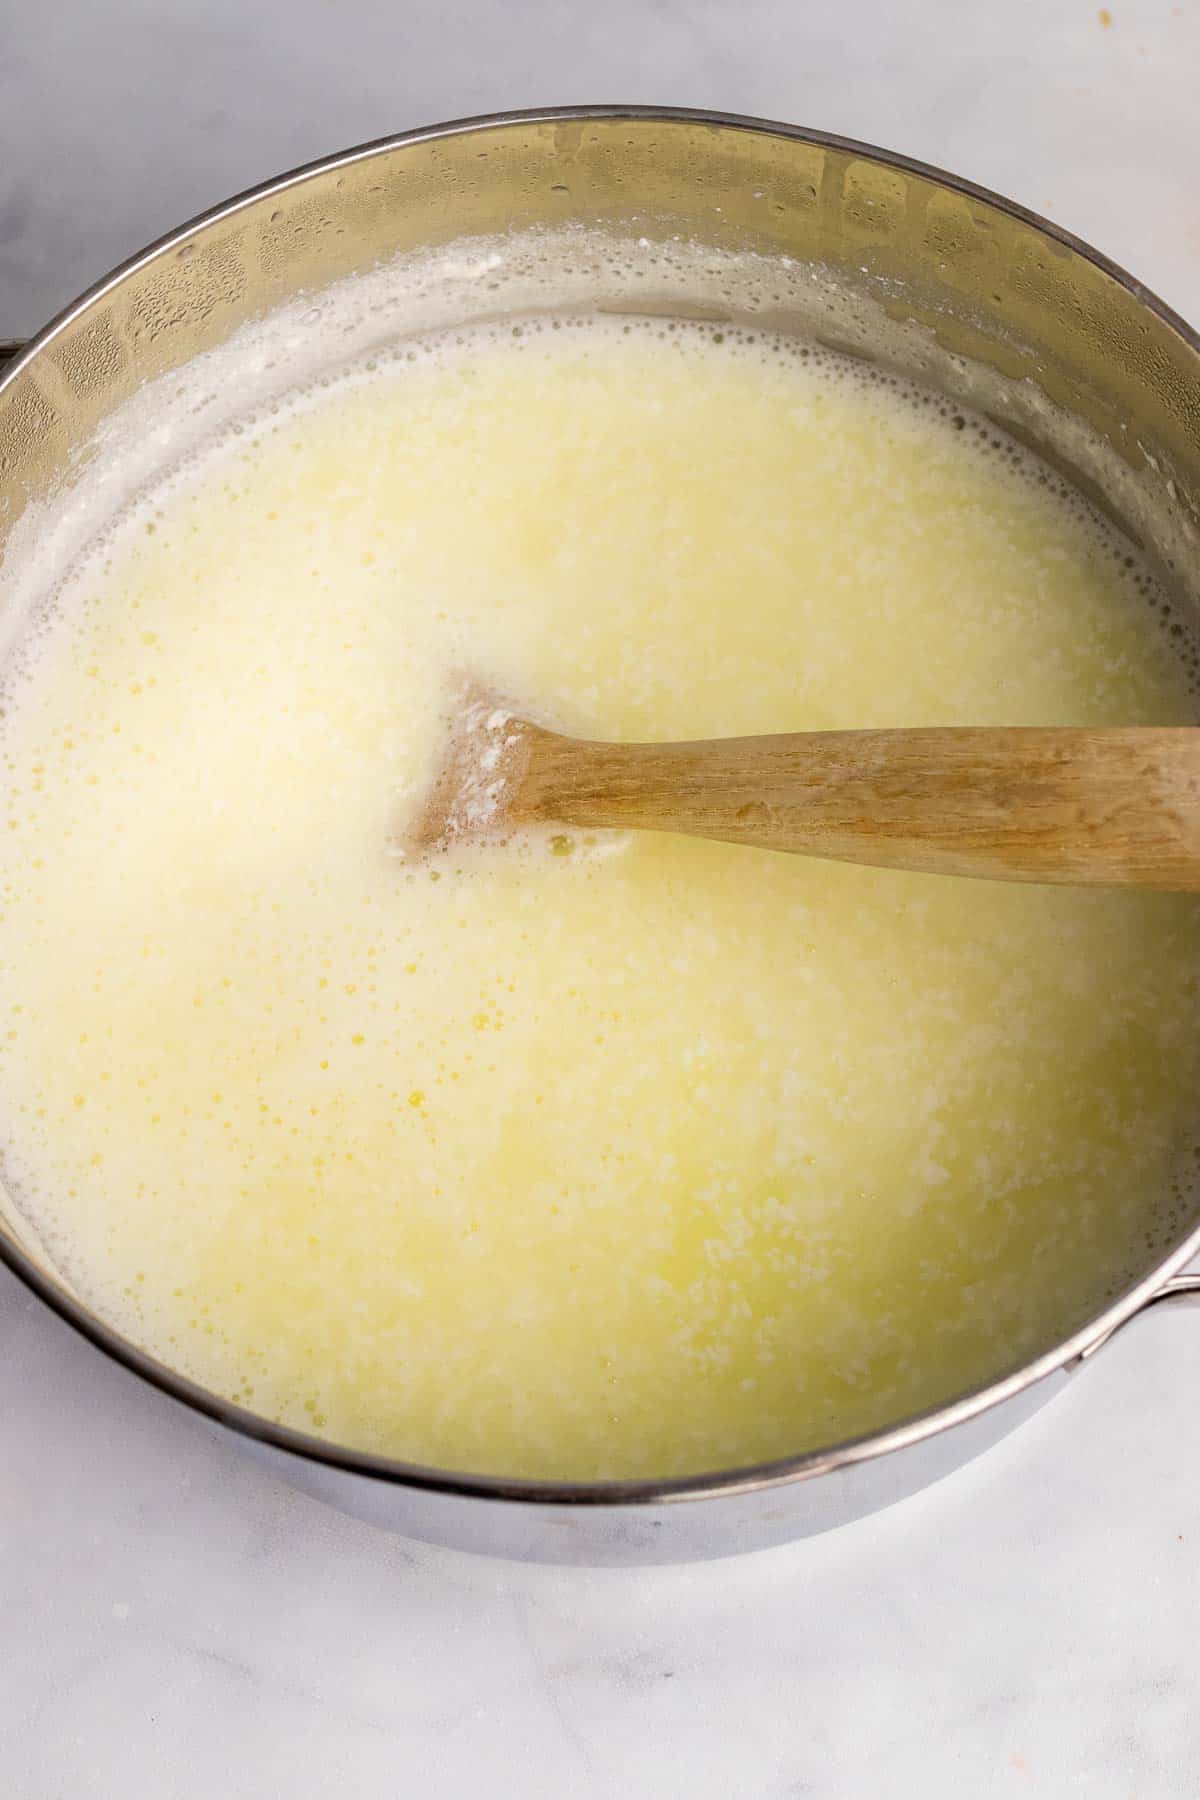 Pot with curd separating from the whey